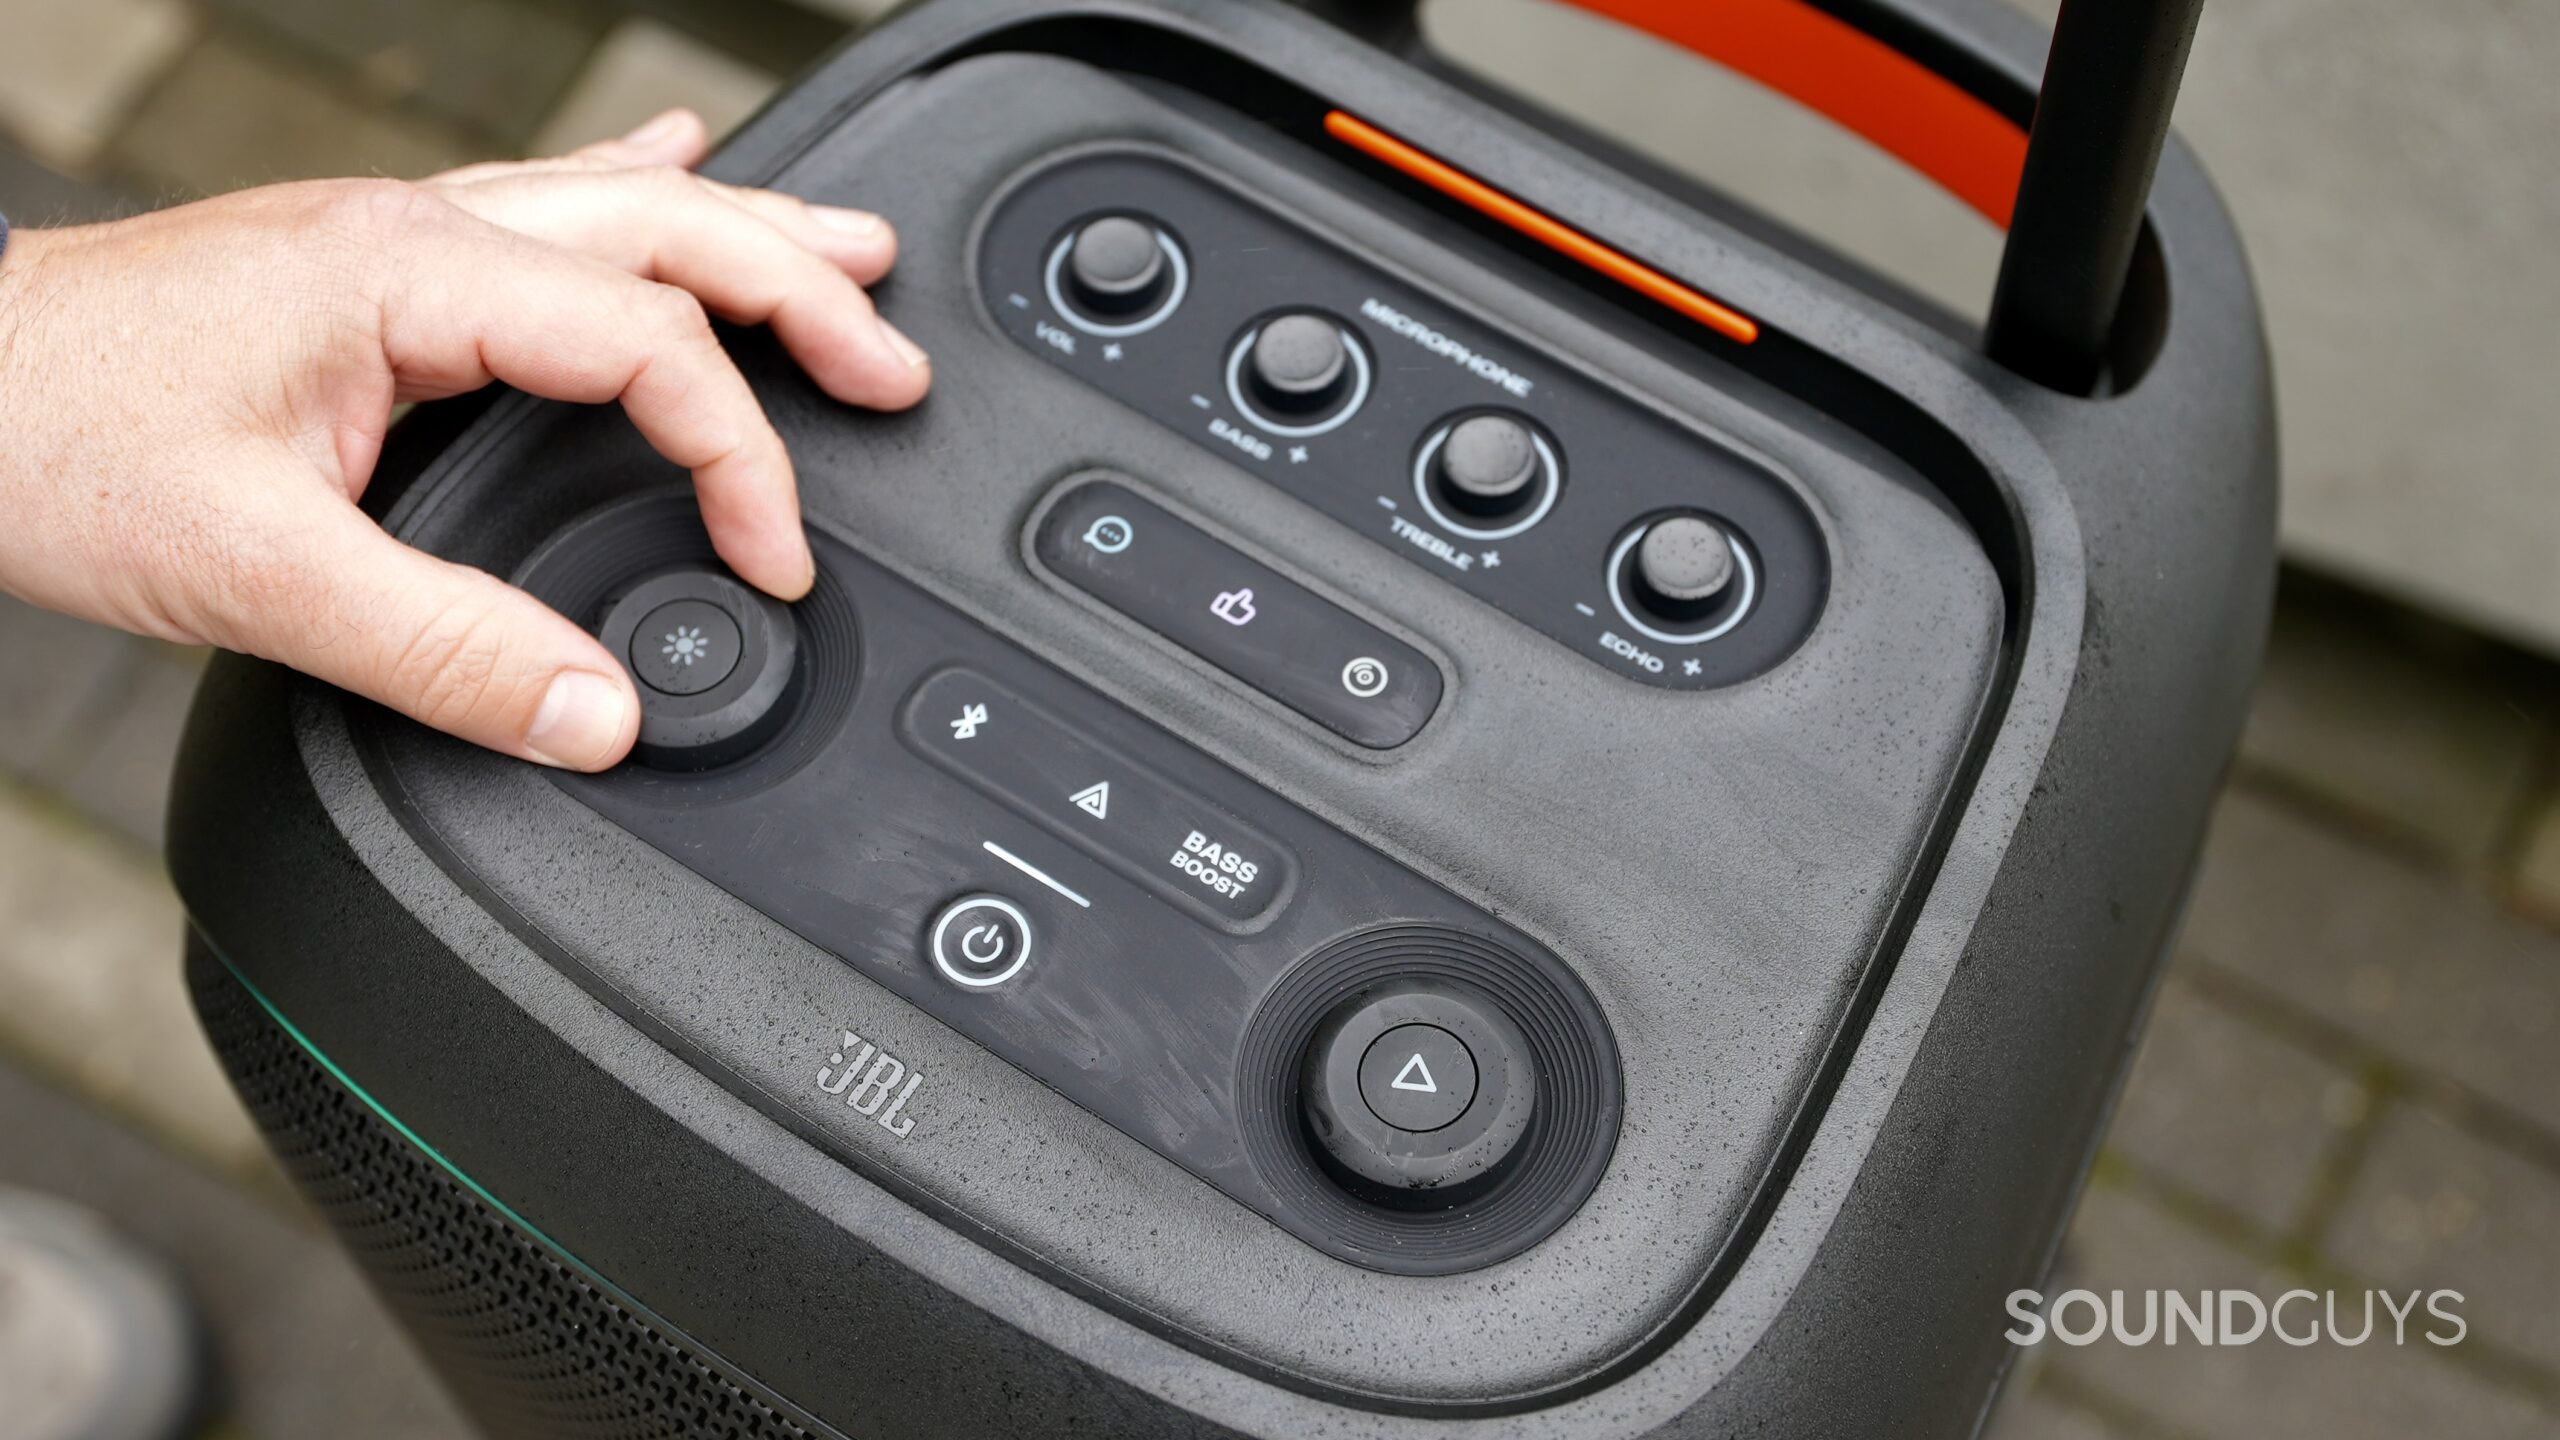 The top control panel of the JBL PartyBox 320